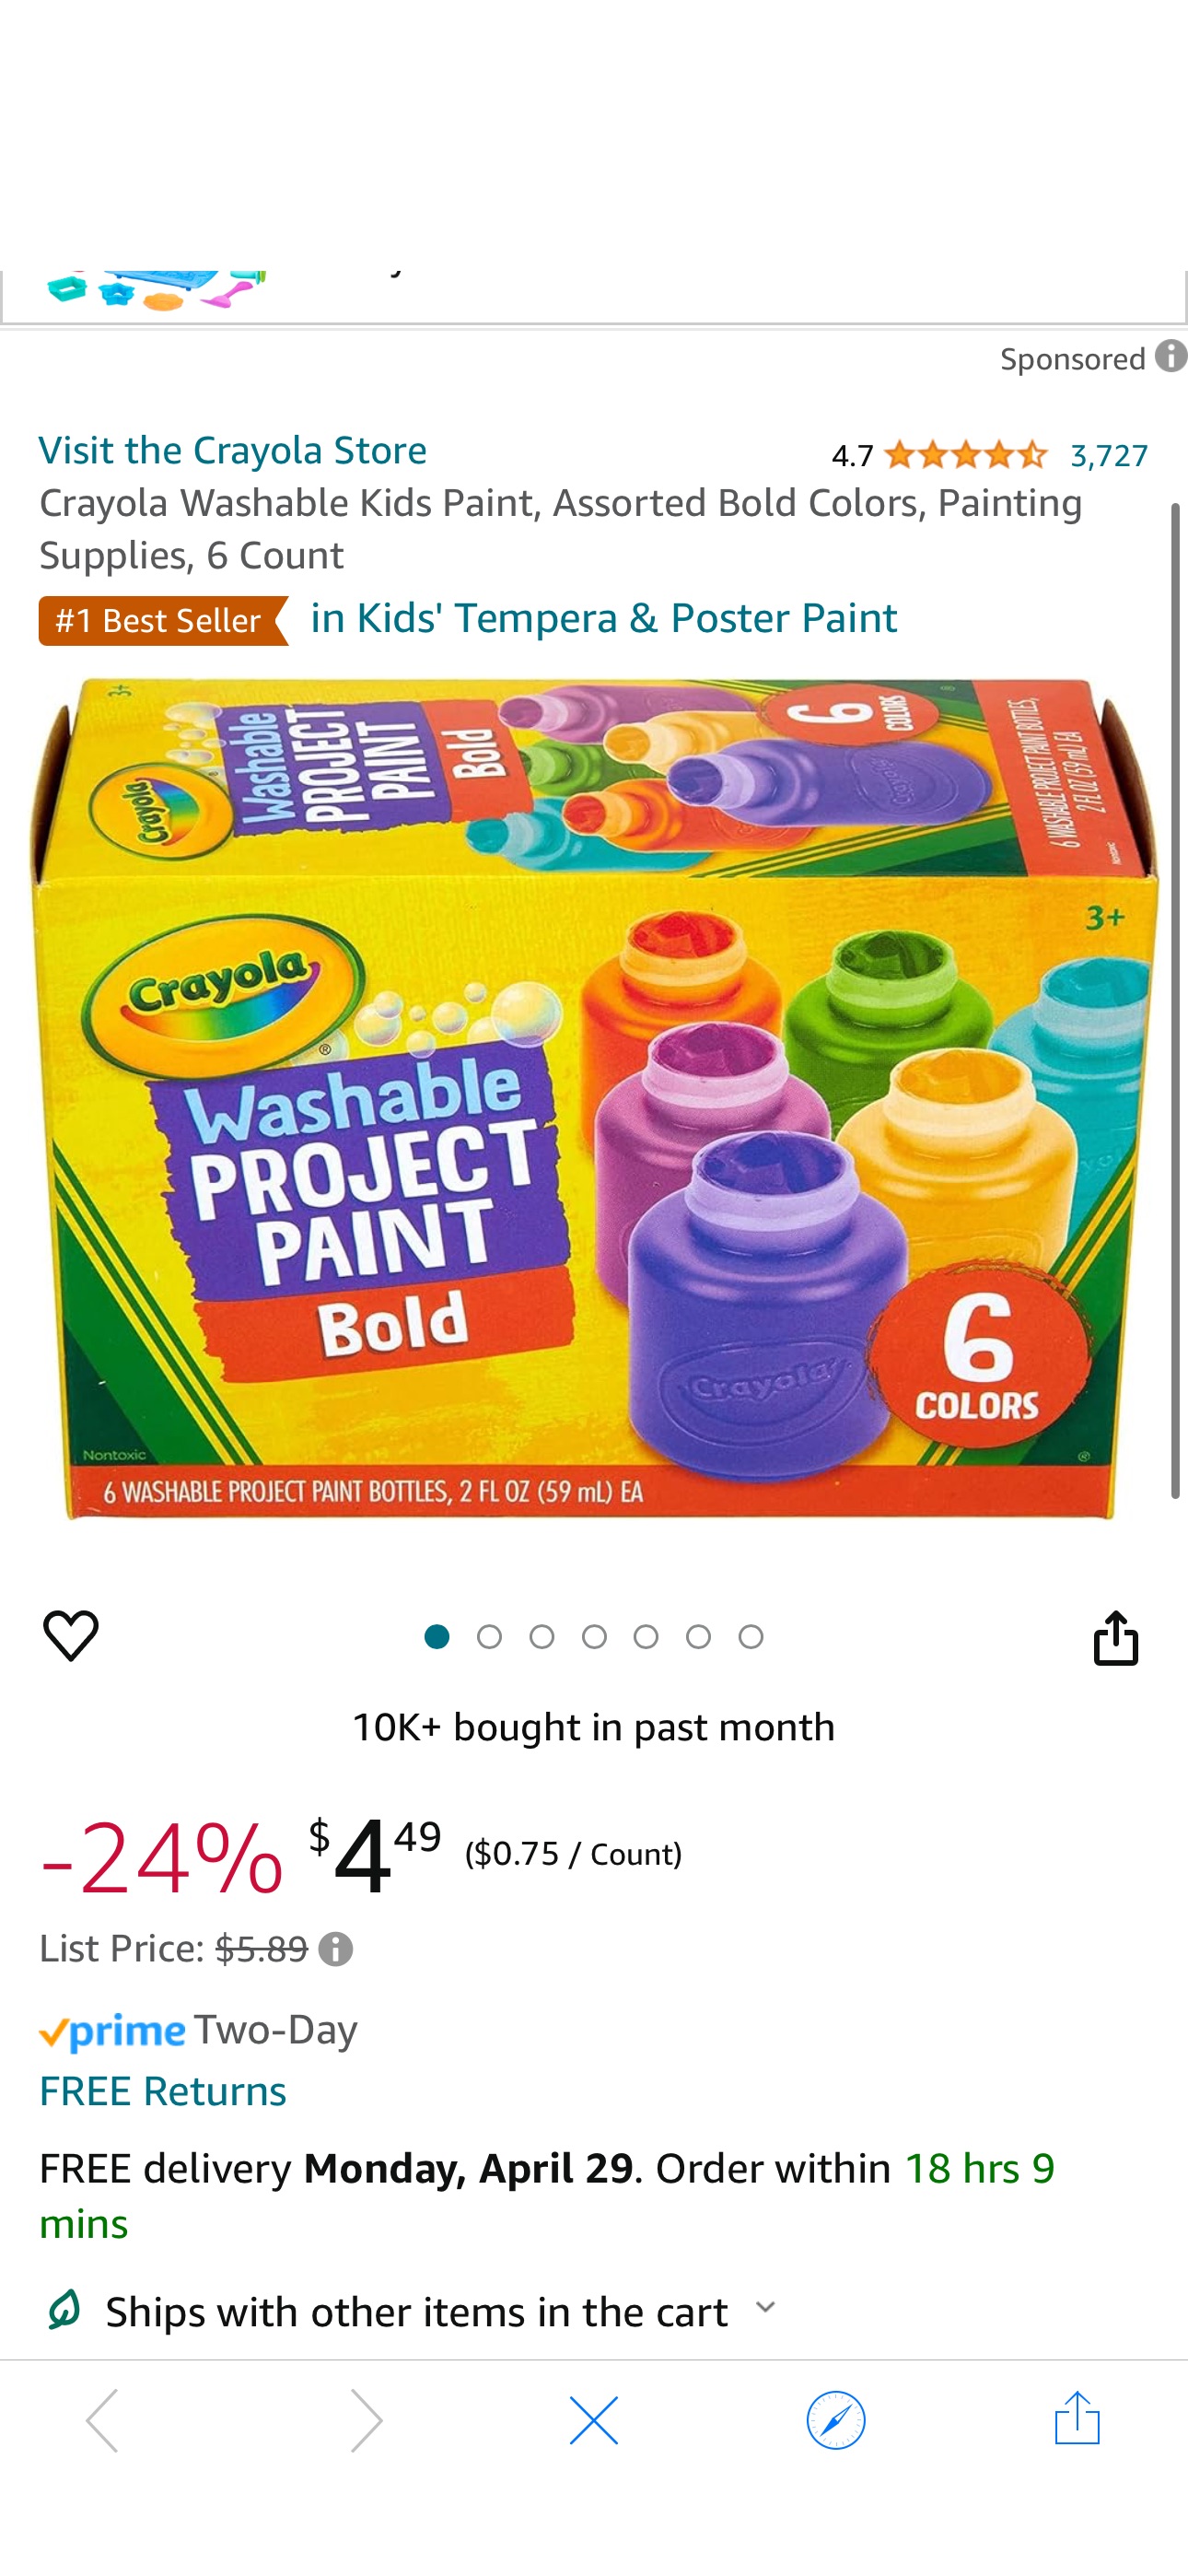 Amazon.com: Crayola Washable Kids Paint, Assorted Bold Colors, Painting Supplies, 6 Count : Toys & Games